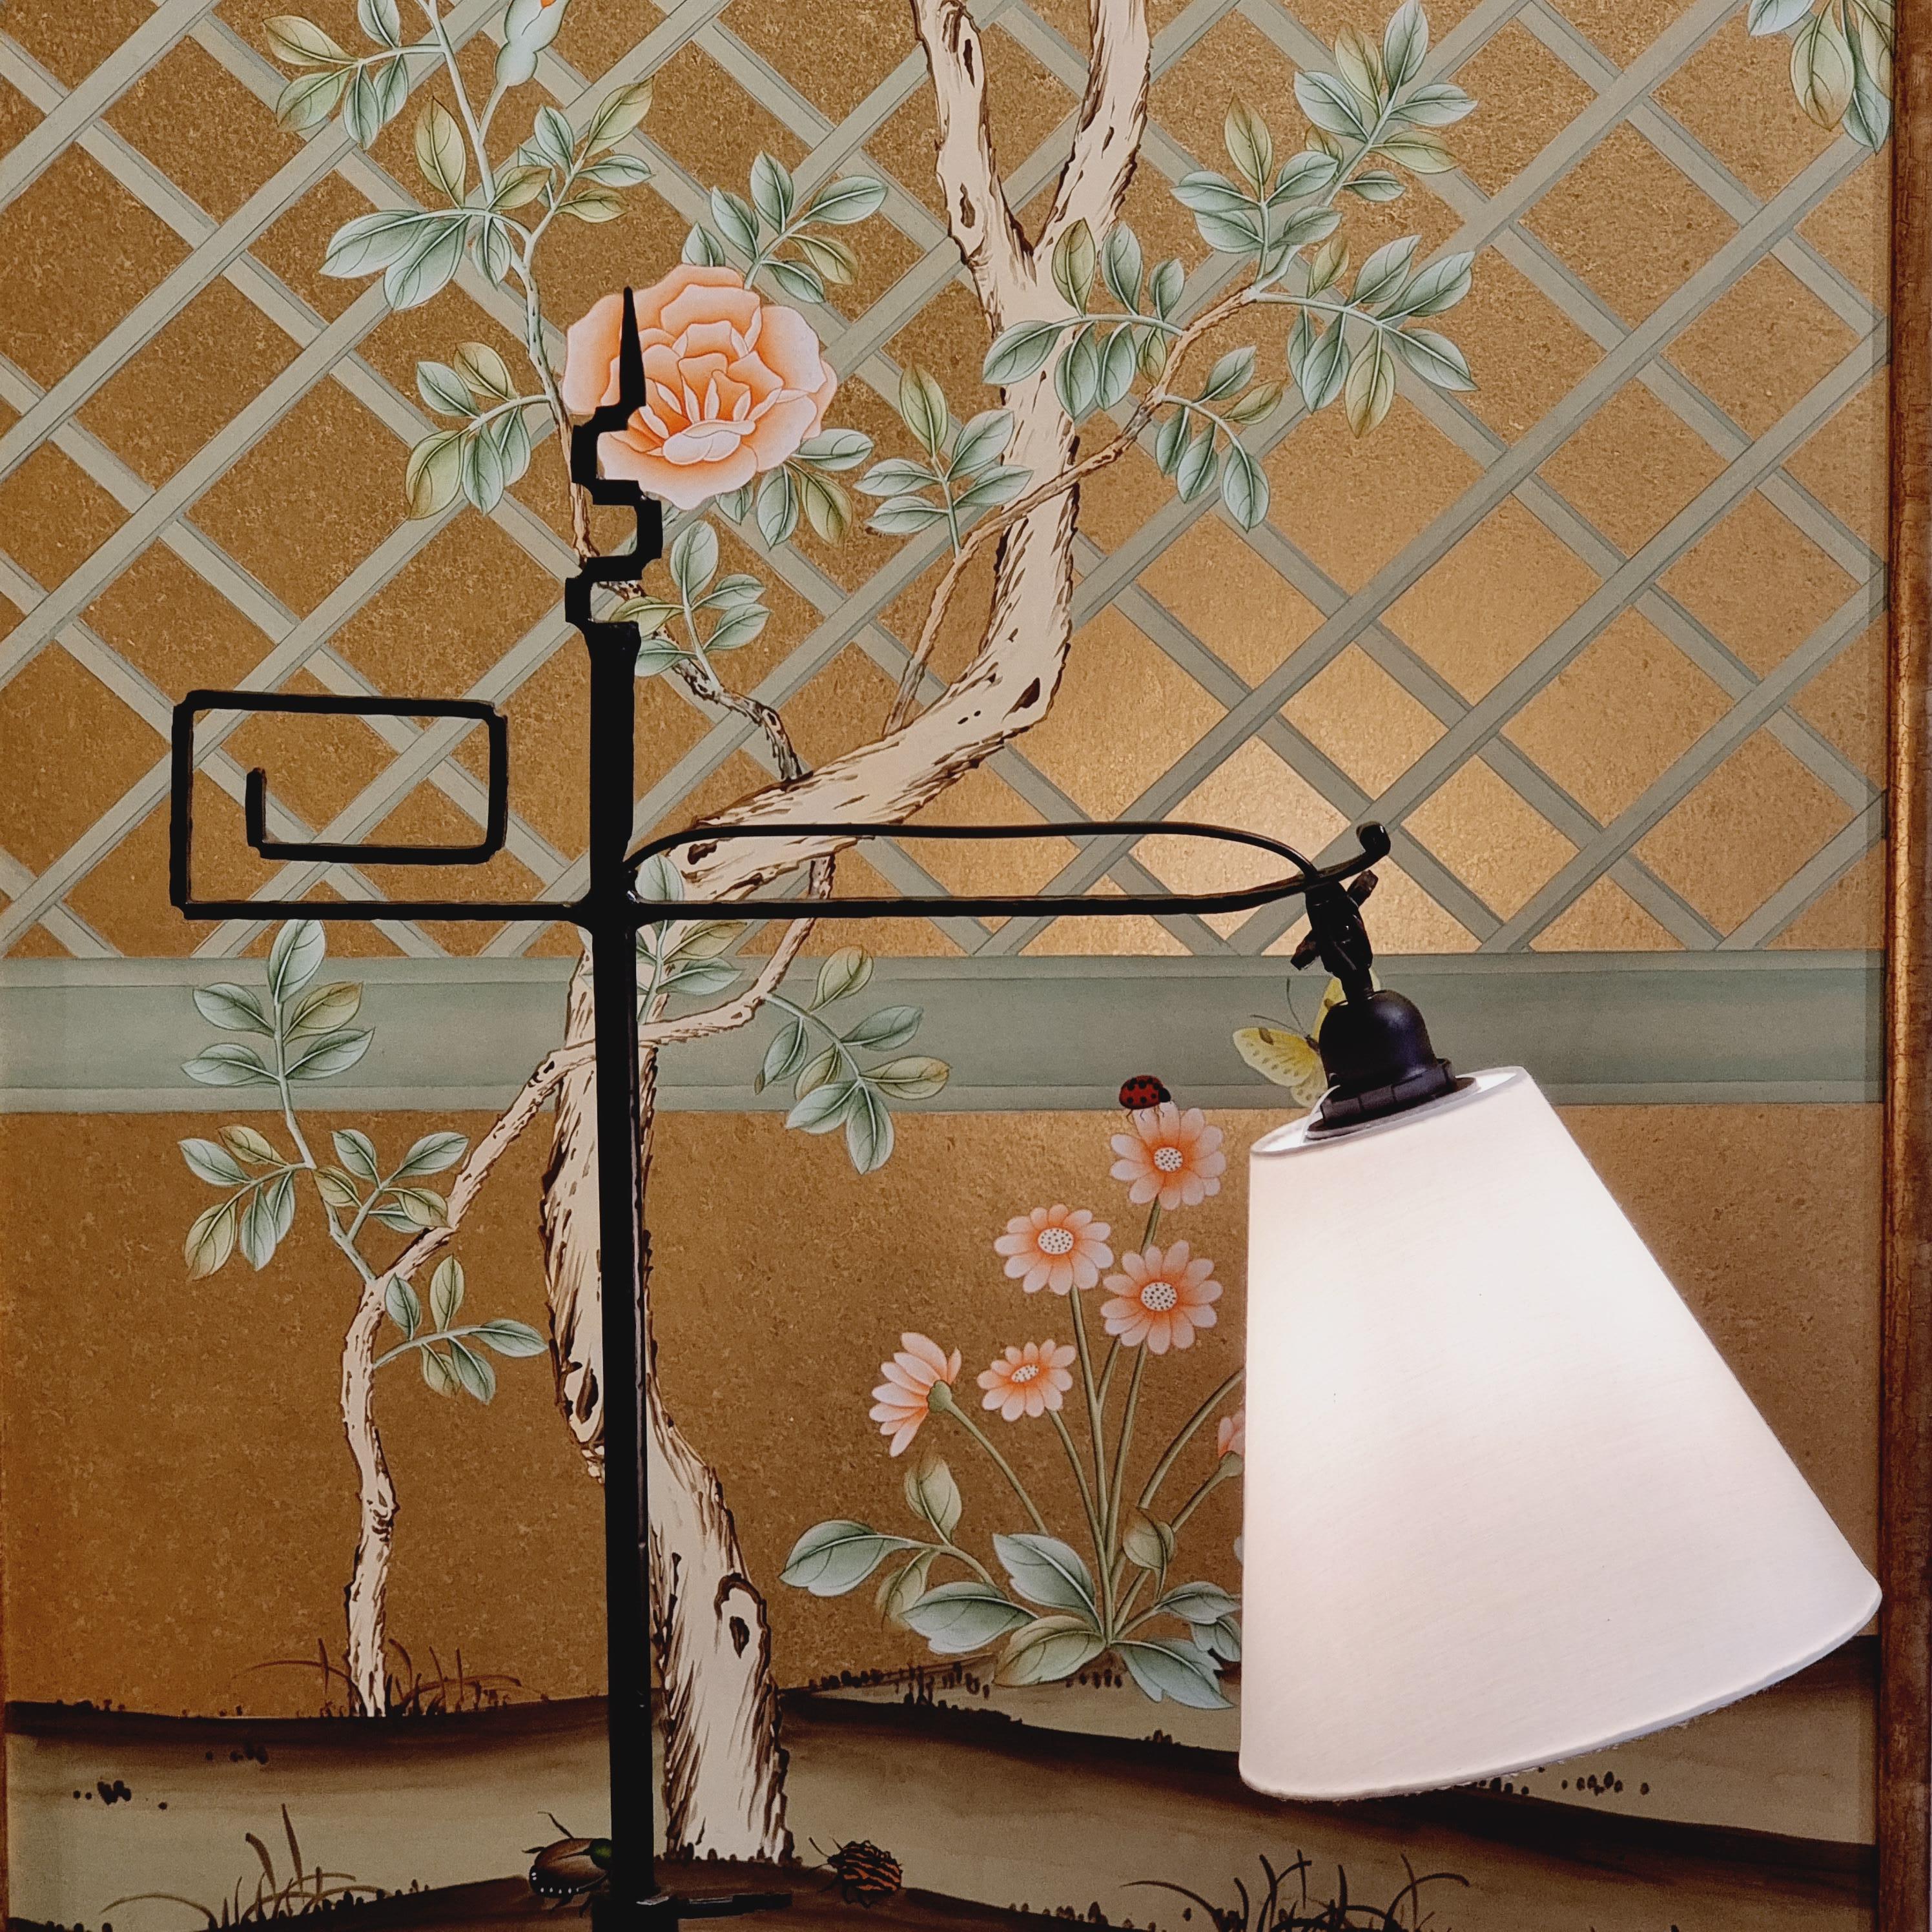 Unique, graphic floor lamp in wrought iron, breautiful details.

This floor lamp is as much as an artwork as functional light source. Re-wired (Swedish standard). Adjustable height ca 120-160 cm. 

In perfect condition, with nice patina.